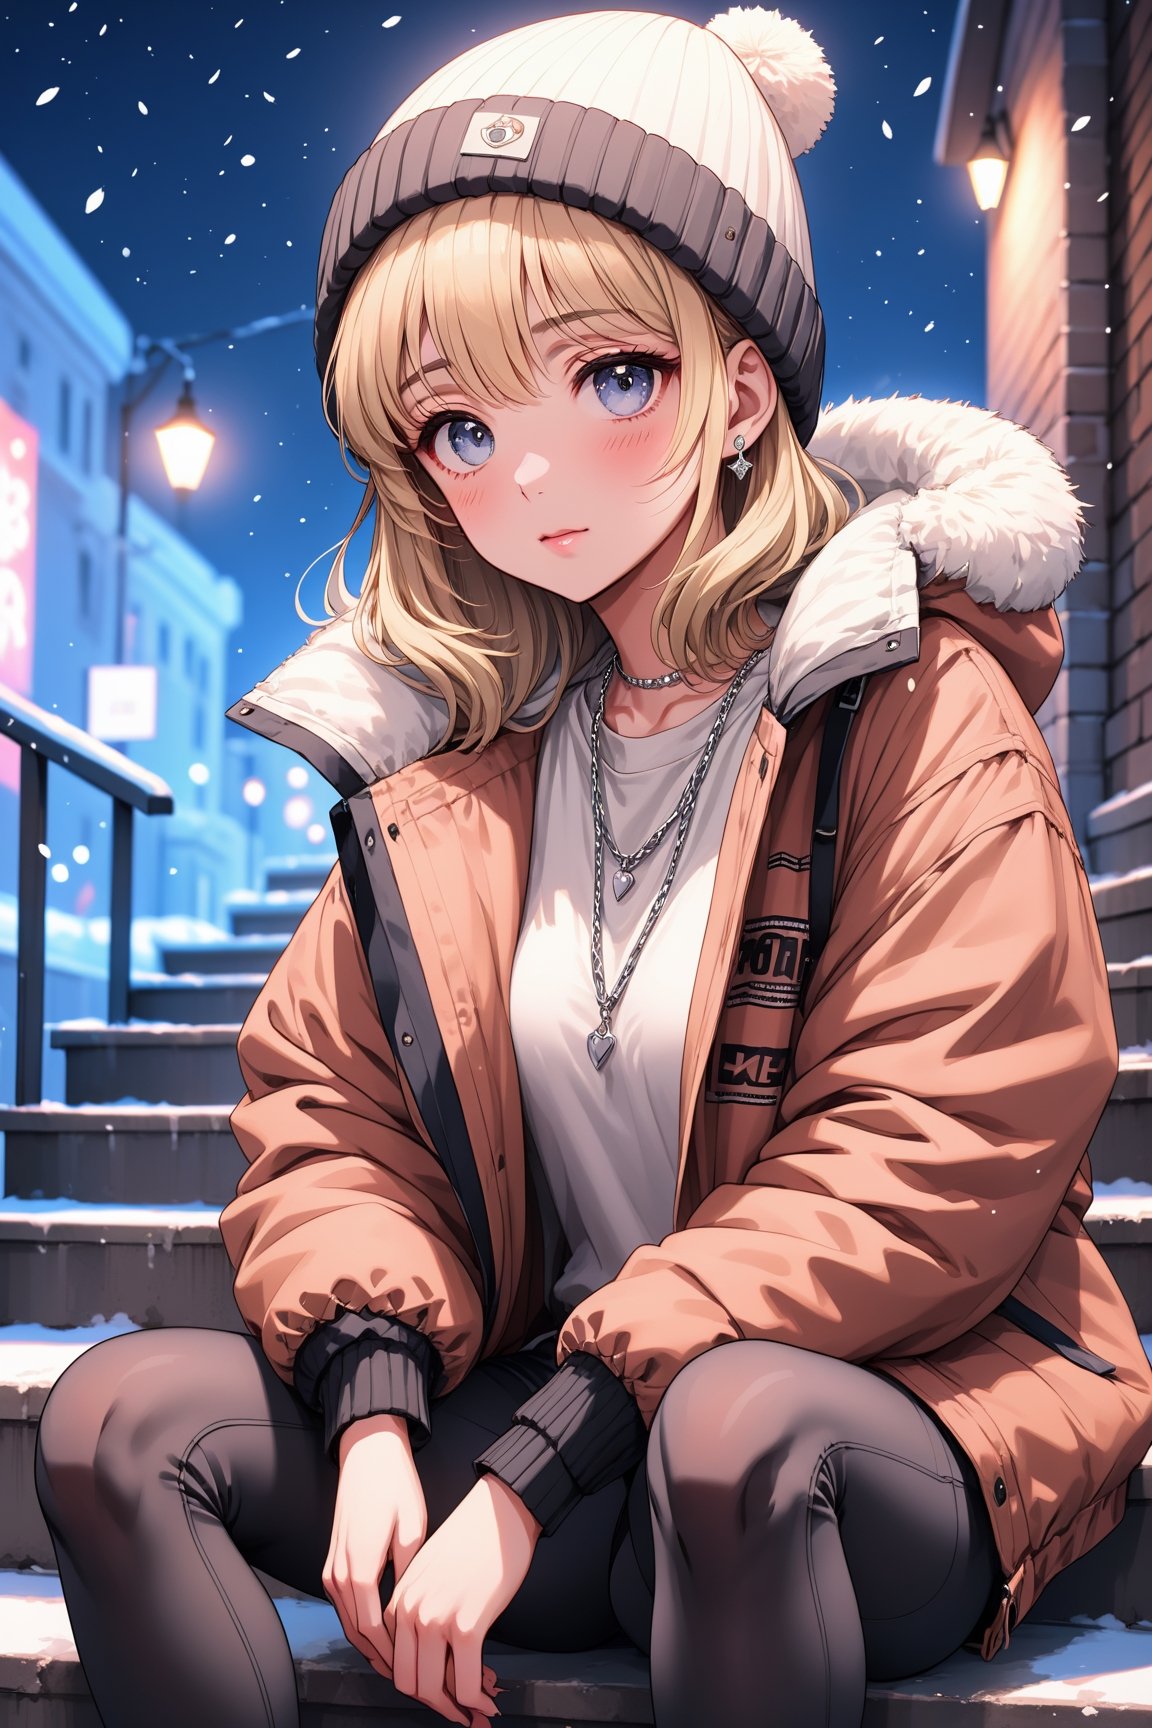 a close up of a woman sitting on a step, beautiful girl, attractive pose, silver necklace, beautiful model, beanie hat, winter jacket, snowing, romantic, casual pose, seductive, attractive anime girl, beautiful anime photo, alluring, aesthetic, thoughtful pose, (bokeh), best quality, masterpiece, long blonde hair,make_3d, 8k,lofi, pov_eye_contact, nighttime, cyber background